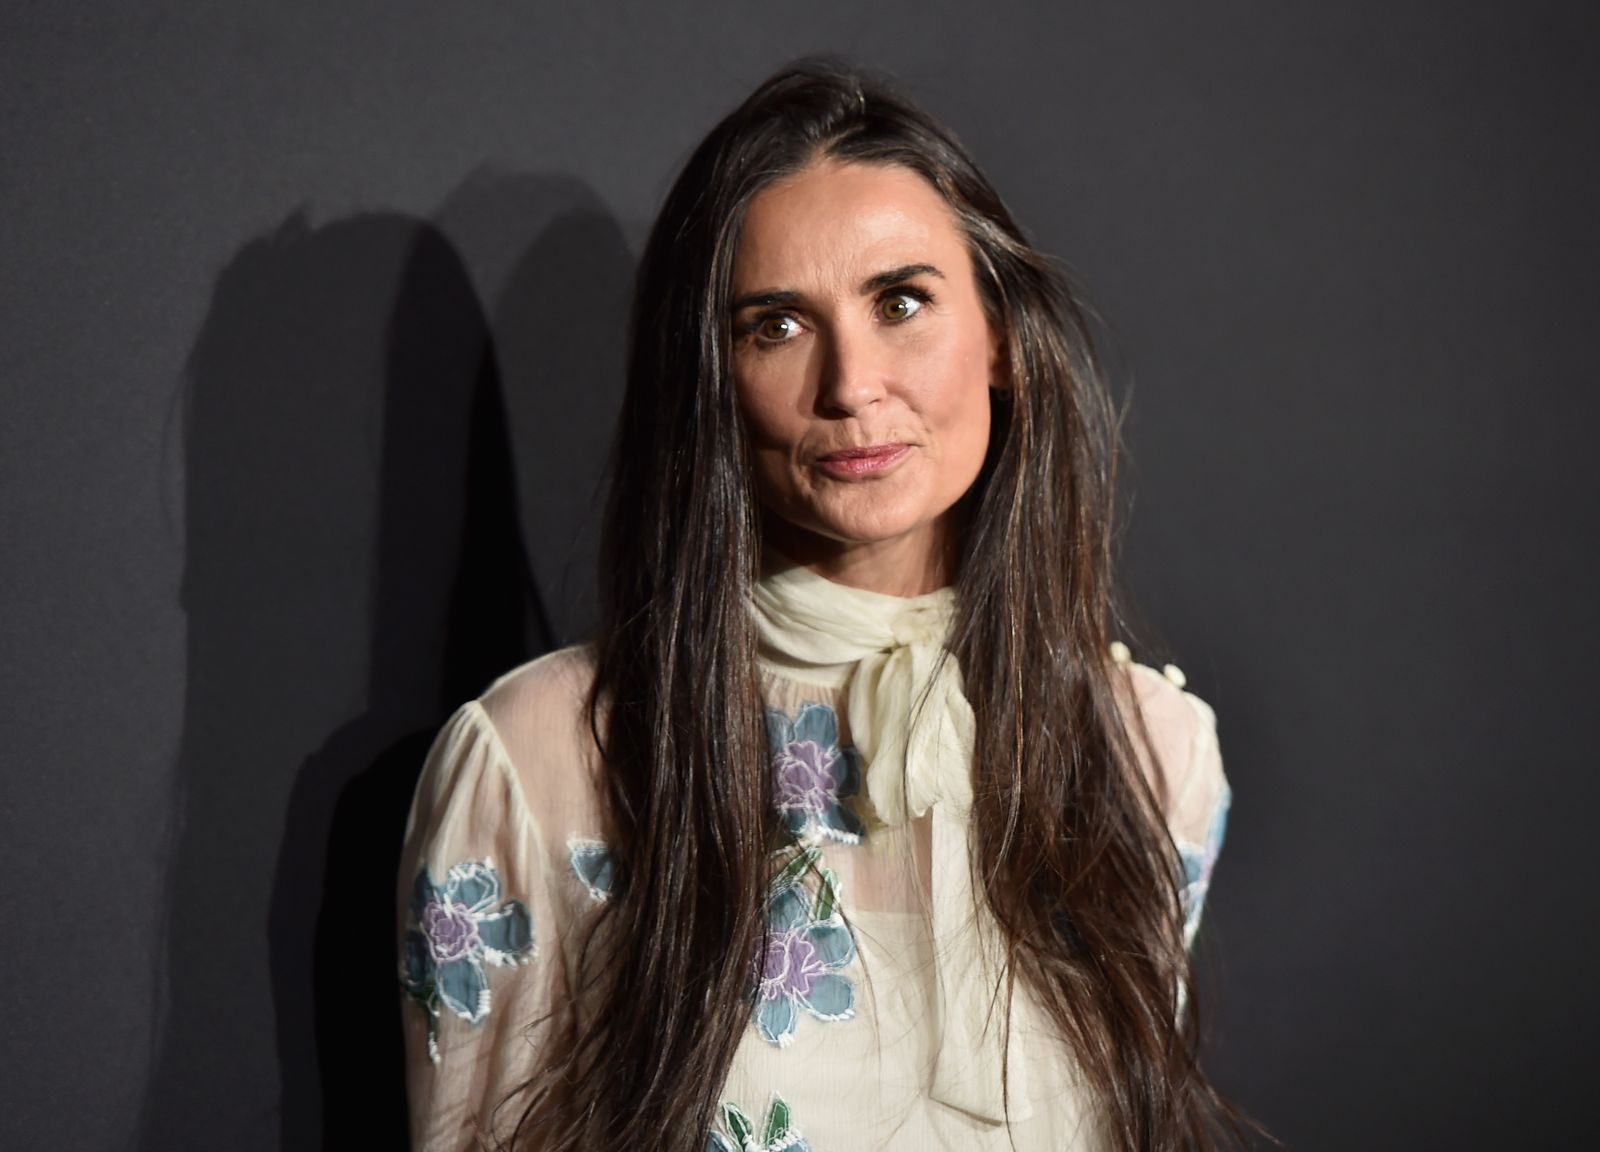  Demi Moore at Prada Presents 'Past Forward' premiere at Hauser Wirth & Schimmel on November 15, 2016 in Los Angeles, California. | Photo: Getty Images